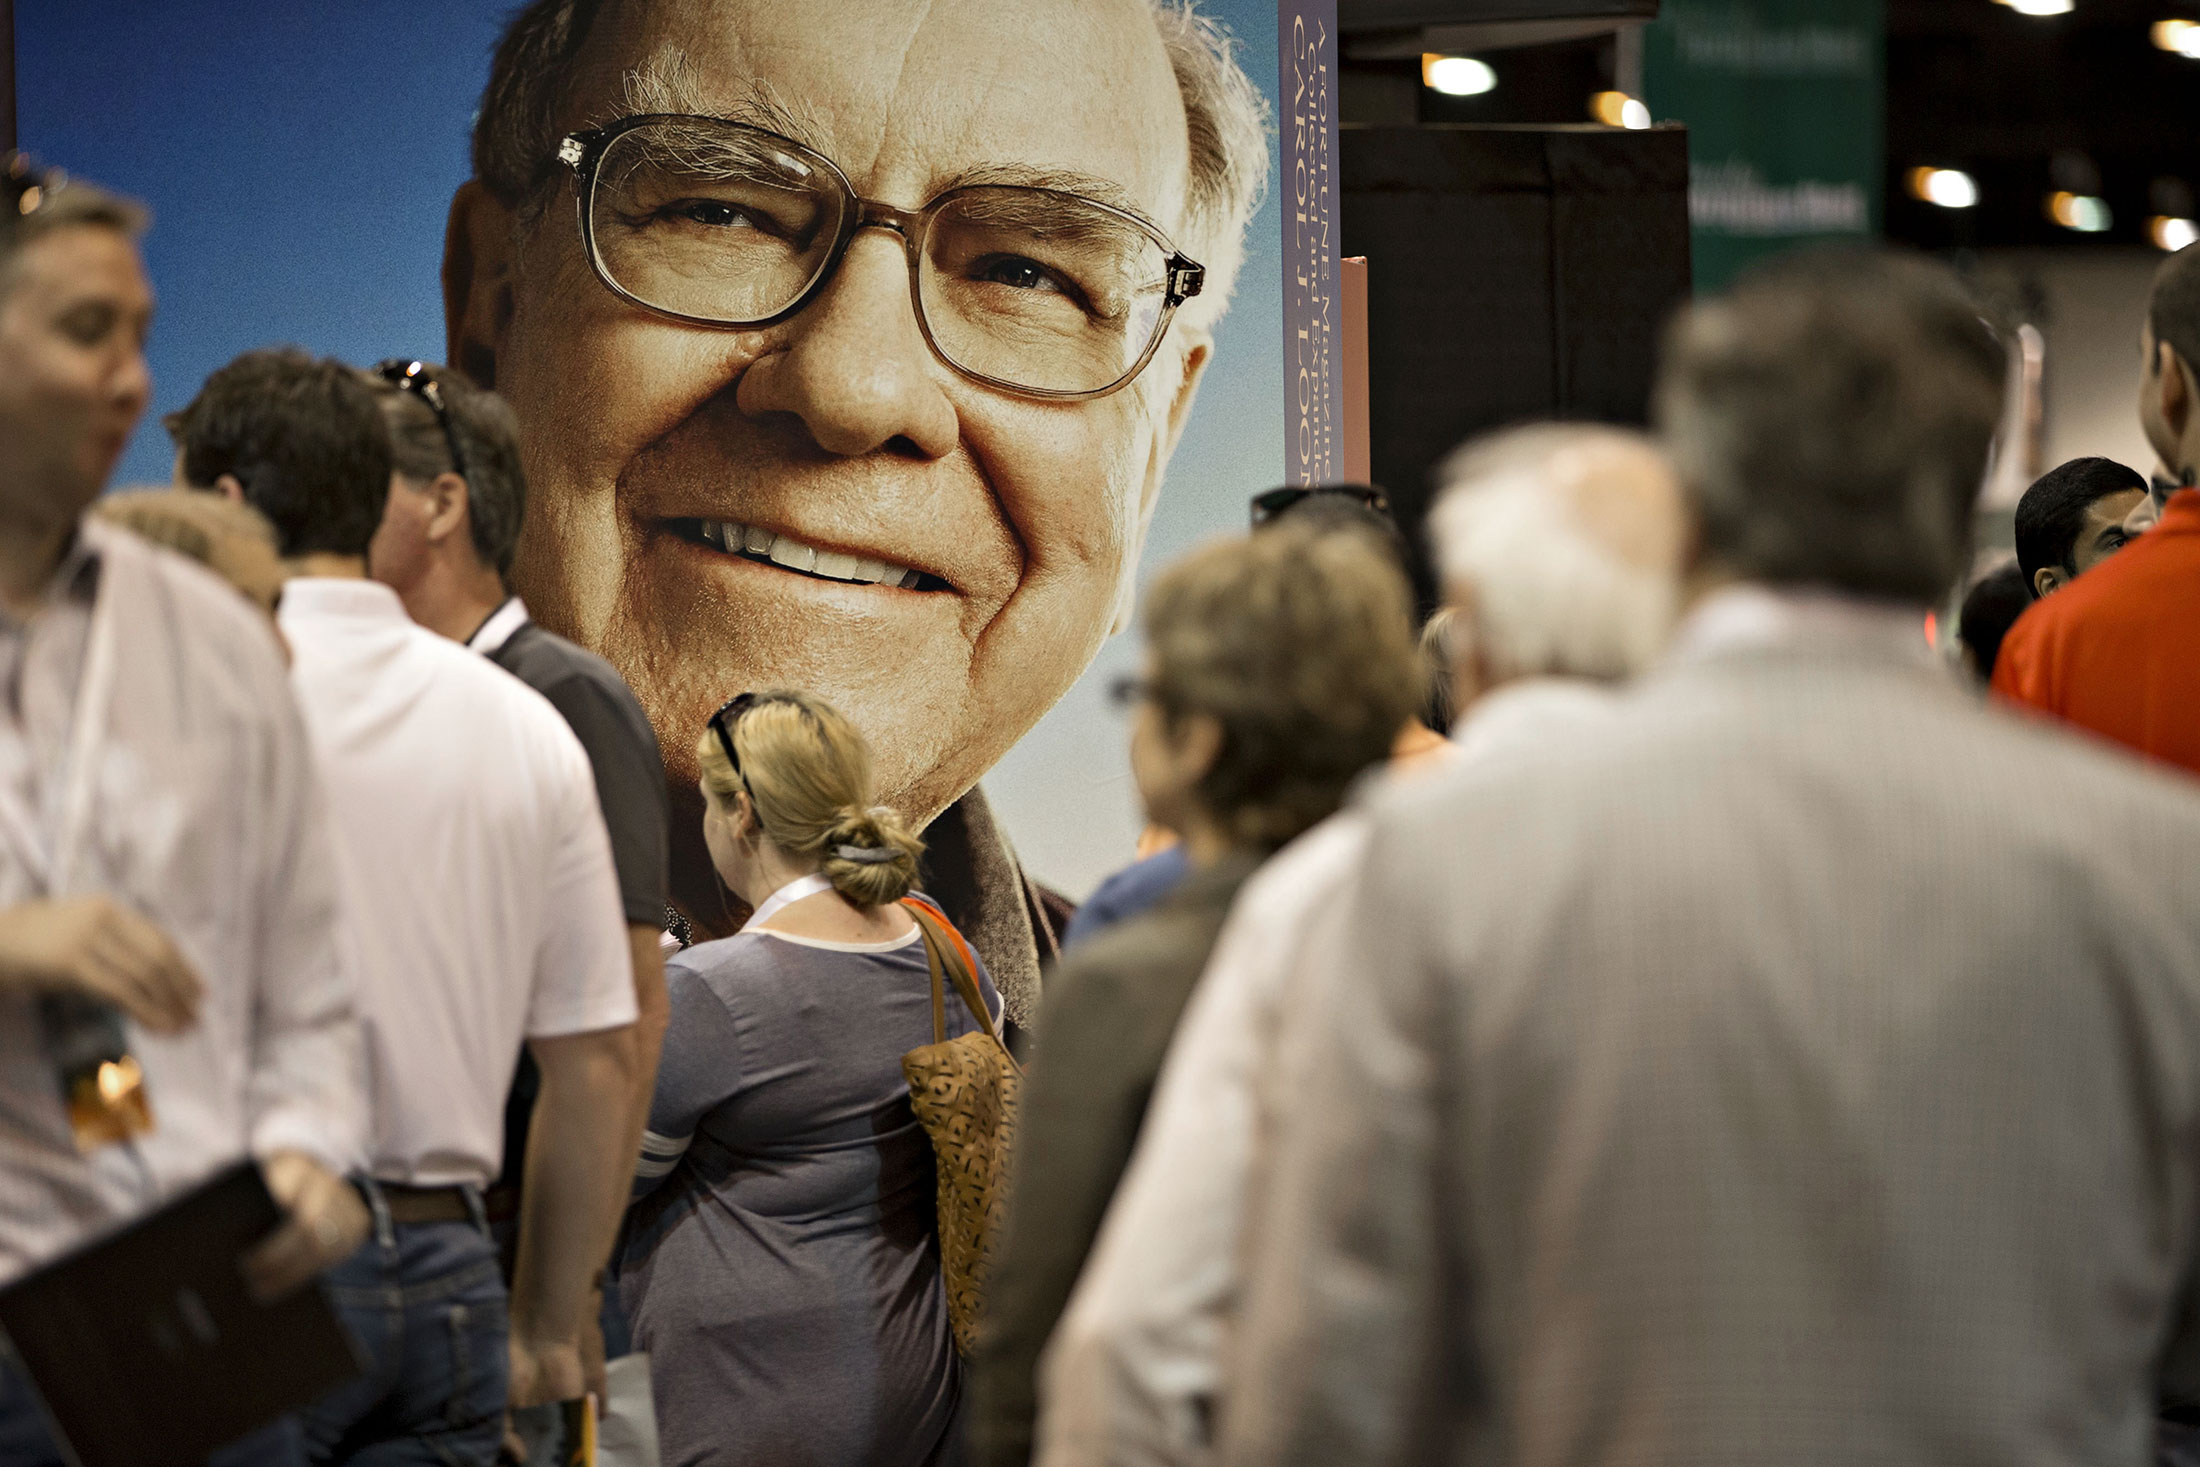 Numerous large companies exist within Berkshire Hathaway, but they pale next to Warren Buffett.&nbsp;